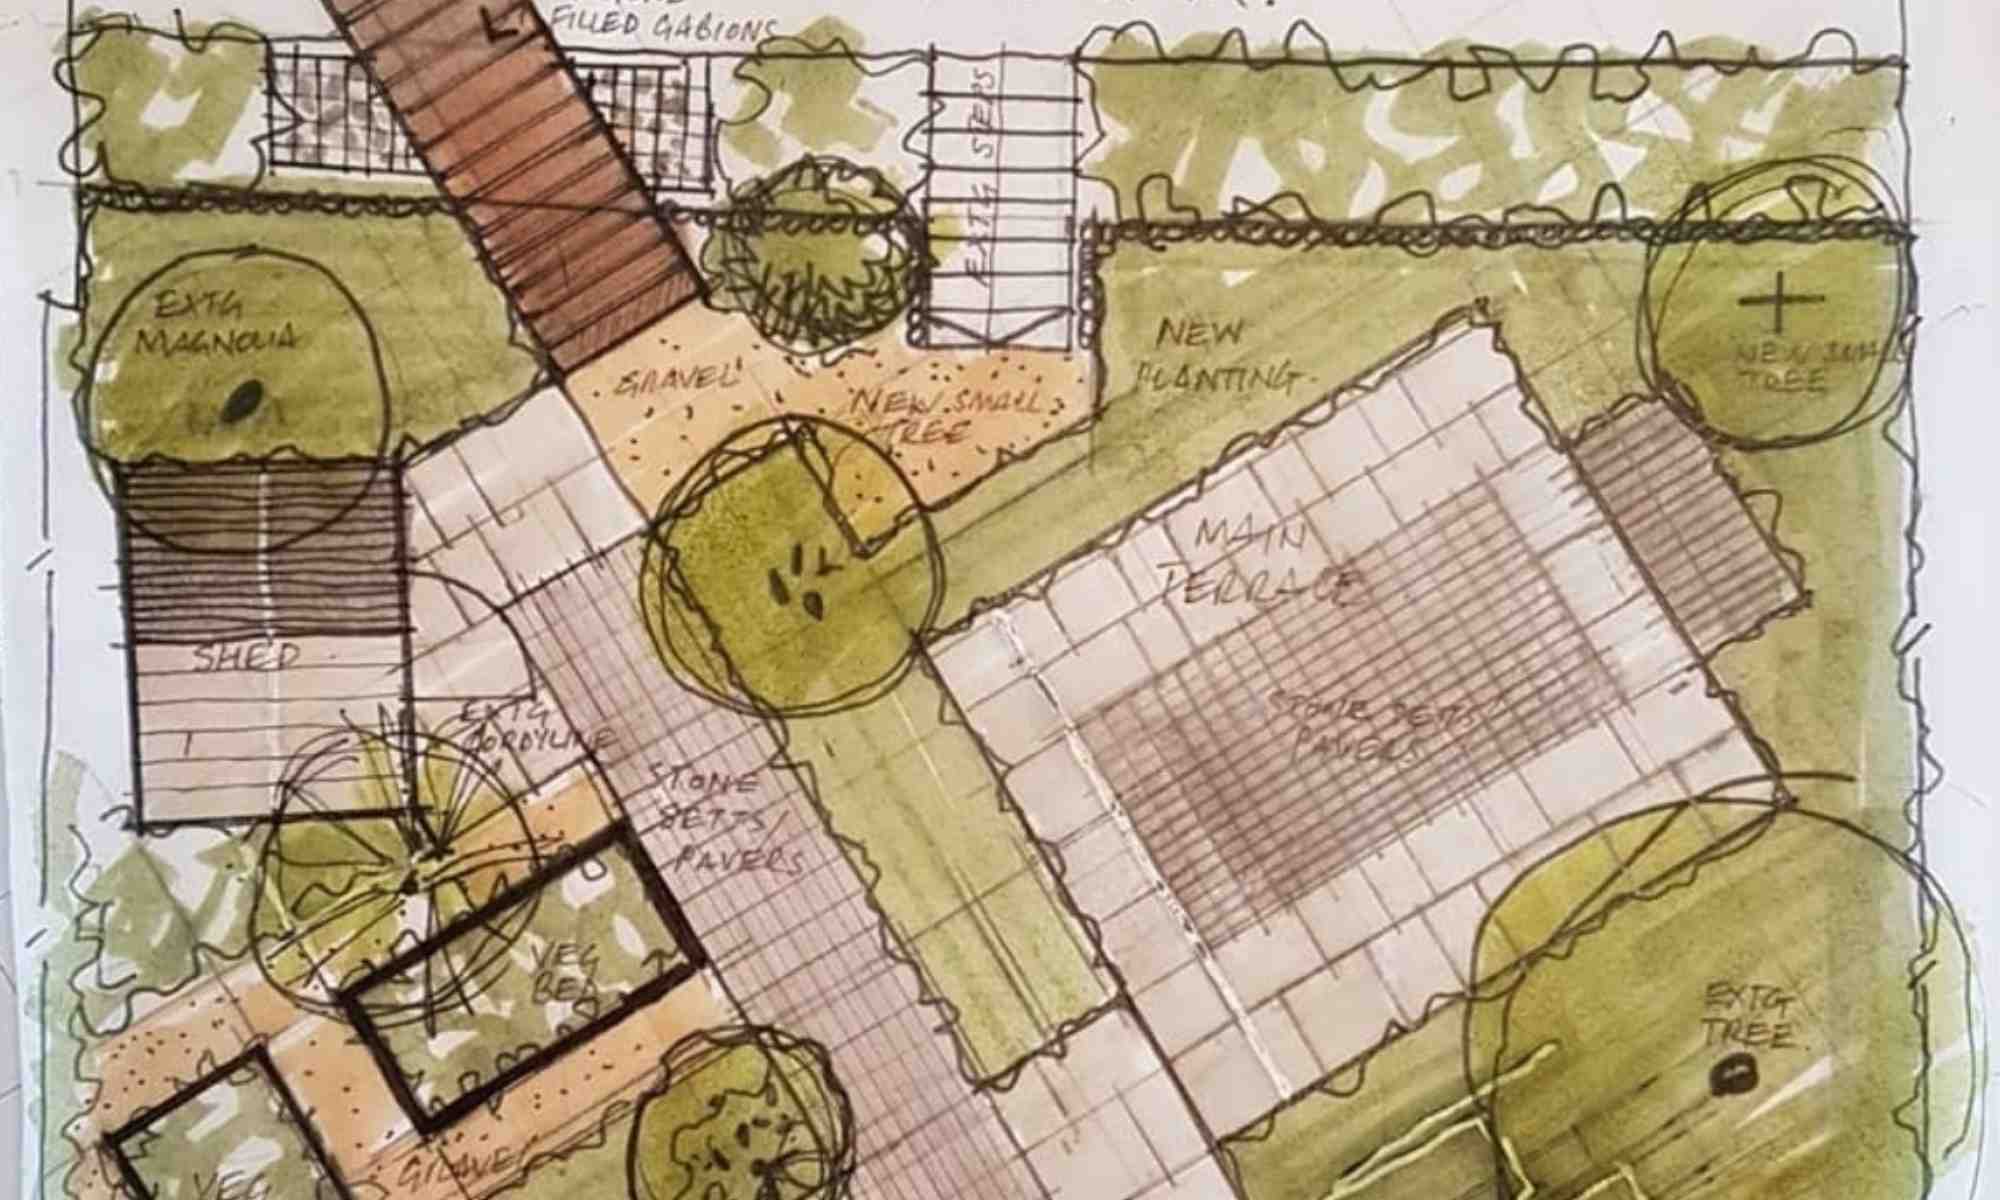 a professionally hand-drawn plan of a garden showing trees, borders, paving, steps and other features